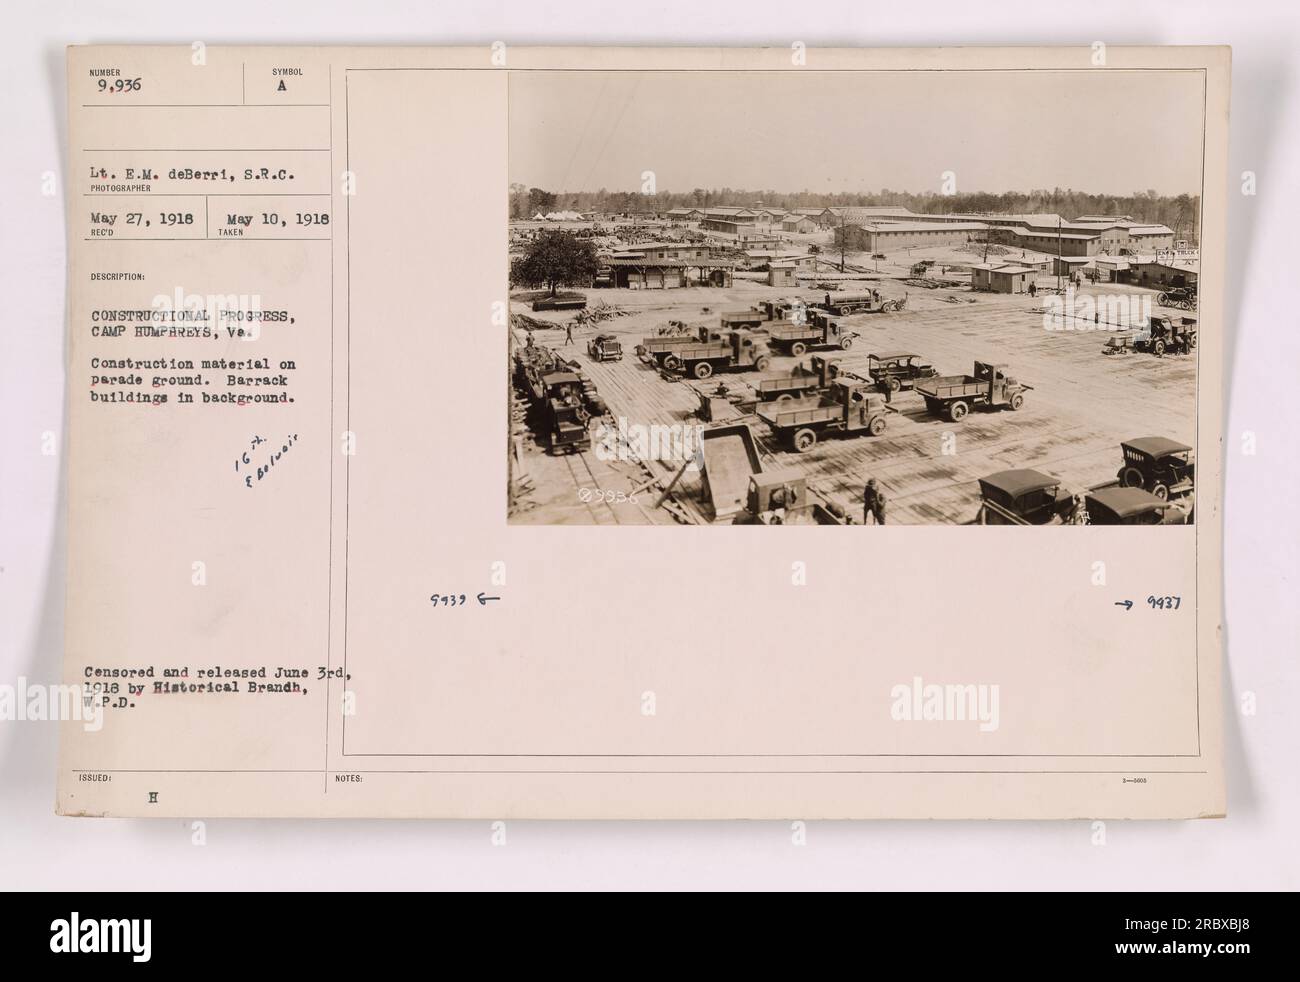 Construction material on parade ground at Camp Humphreys, VA. Barrack buildings can be seen in the background. Photo taken on May 27, 1918, by Lt. E.M. deBerri. This image was censored and released on June 3rd, 1918, as part of the Historical Branch's records. Stock Photo